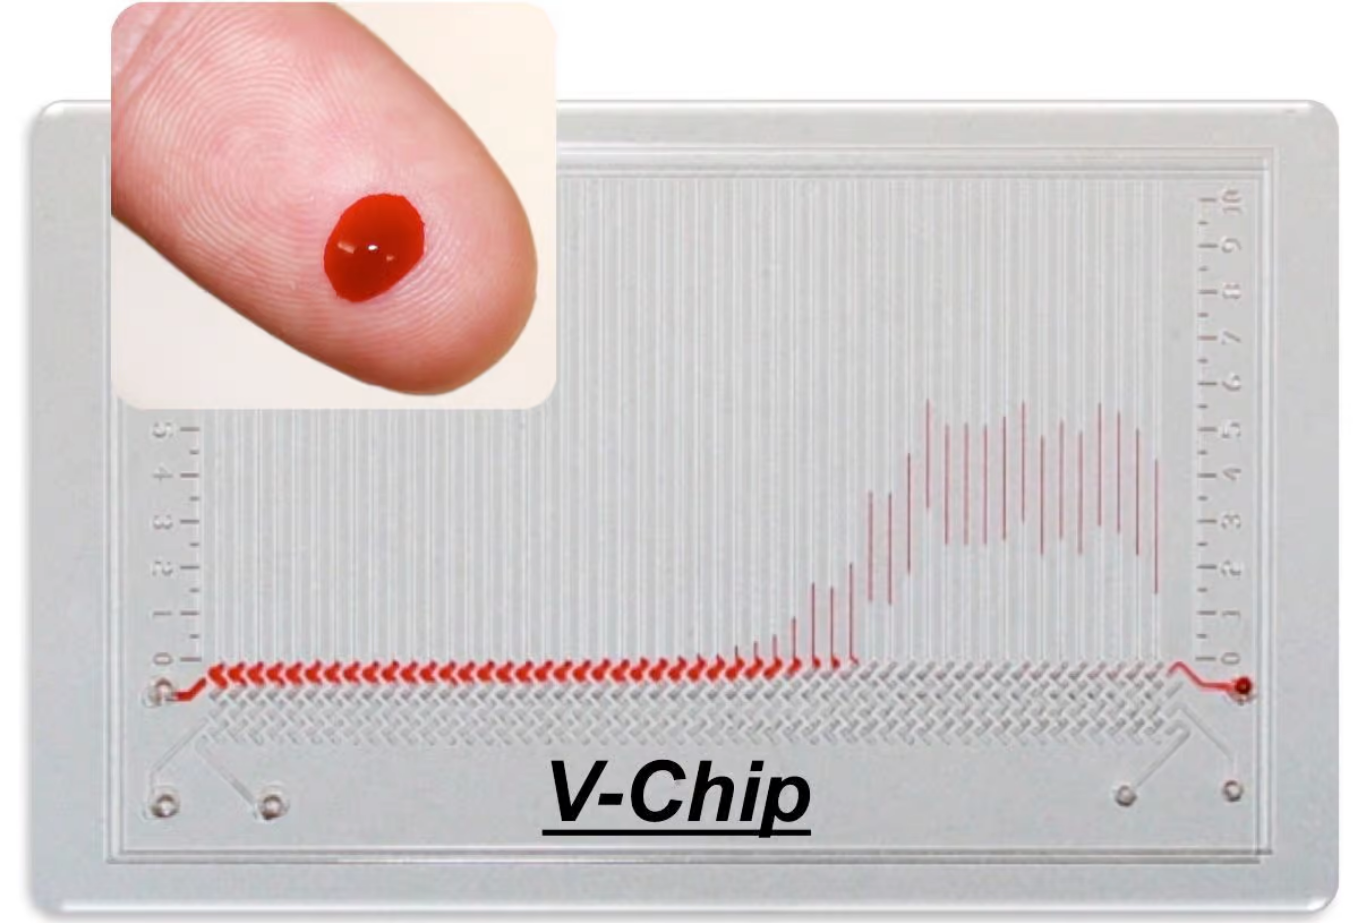 Medical tests to soon be possible via coin-sized chip